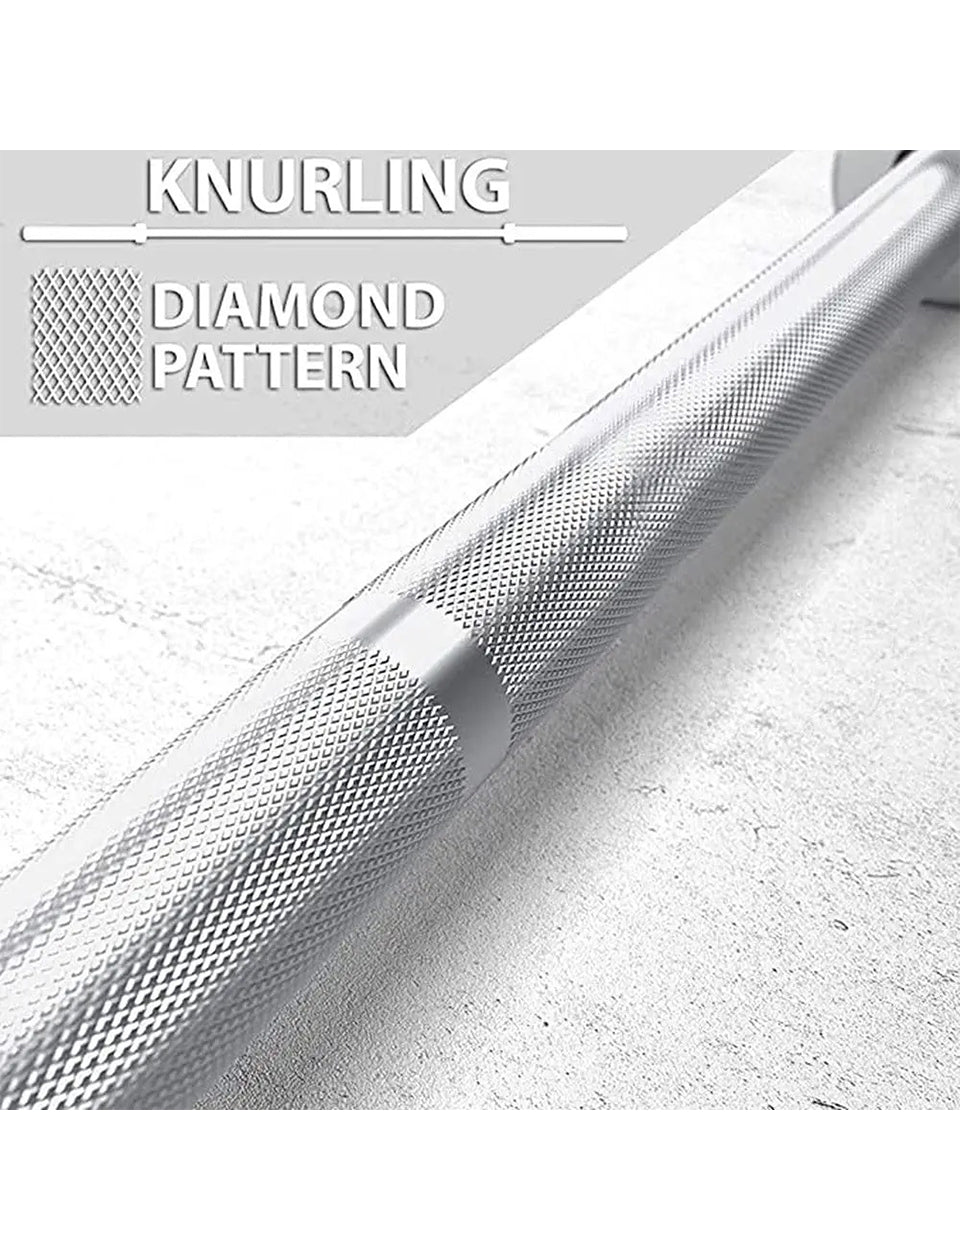 Olympic Straight Bar-knurling gives firm grip for lifters